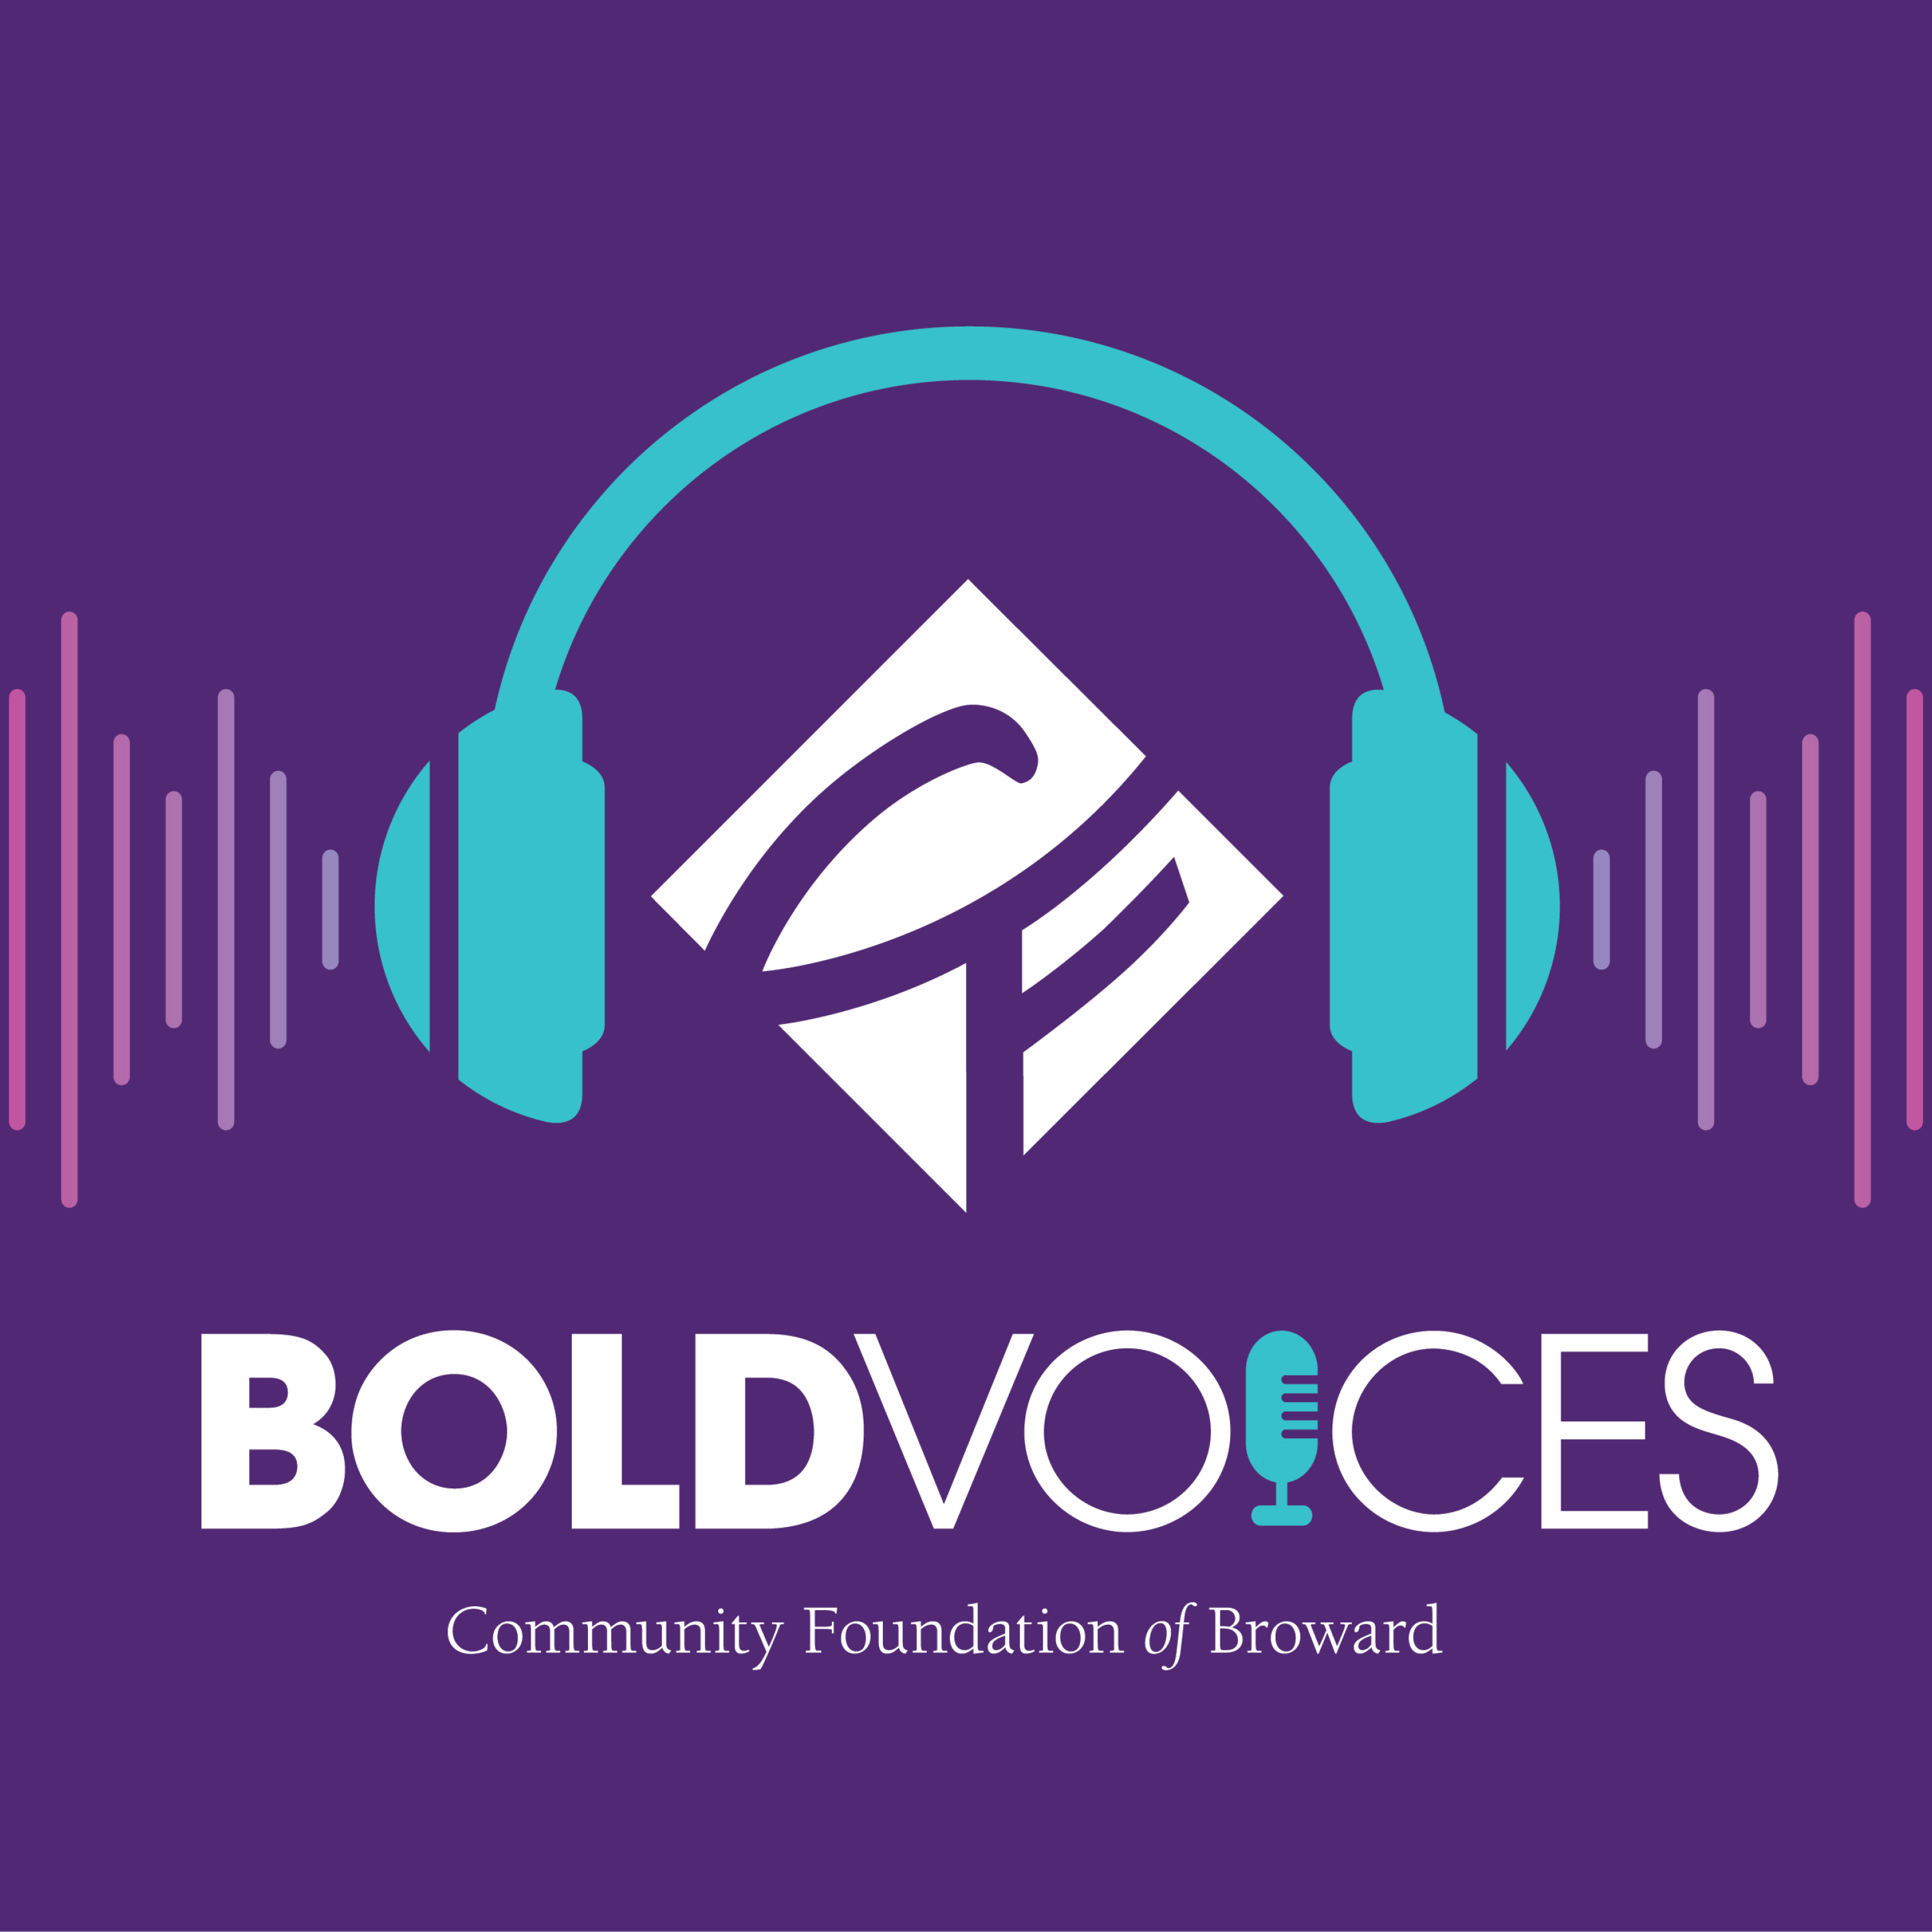 BOLD VOICES